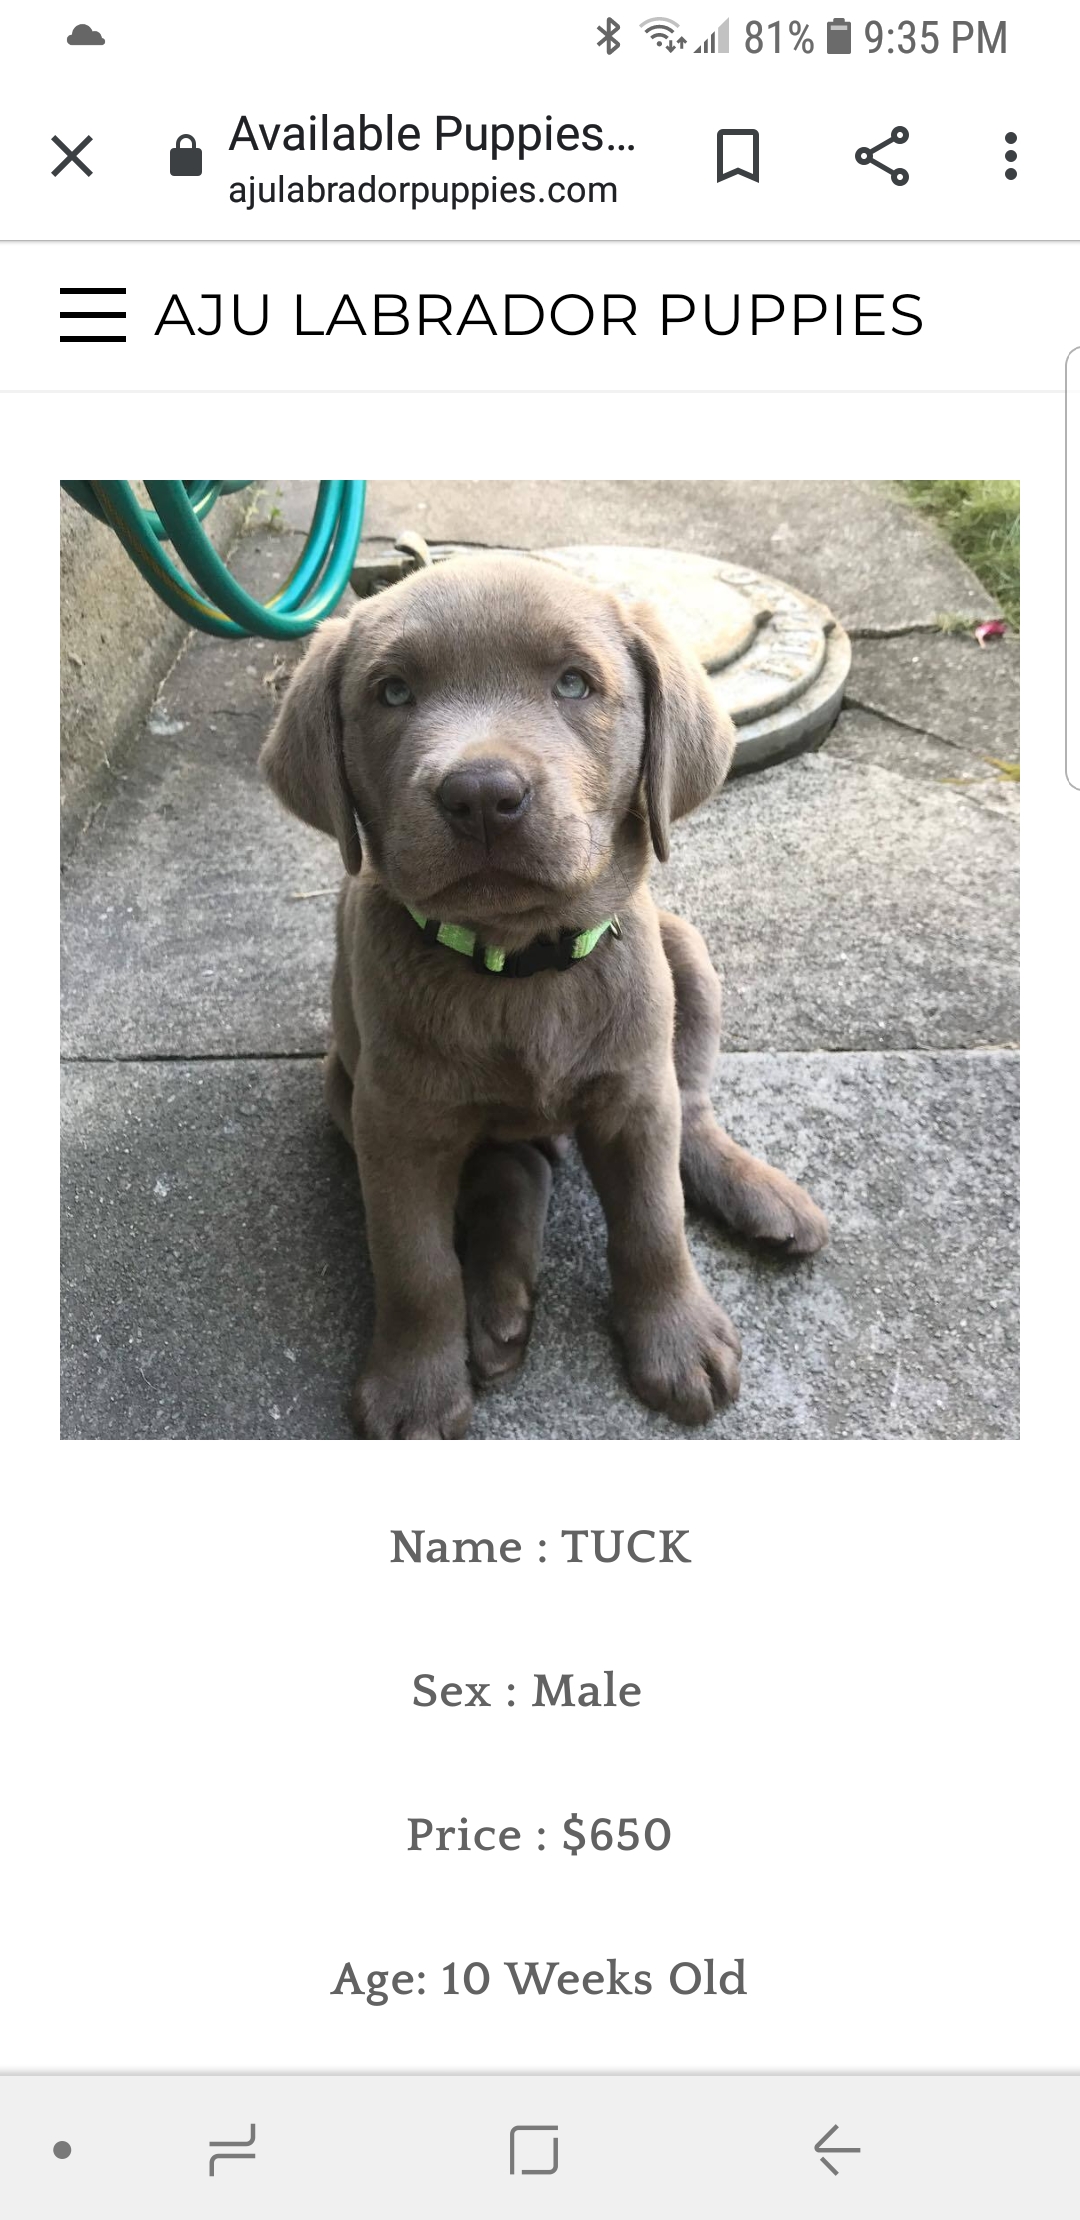 One of the pups "for sale" on their website